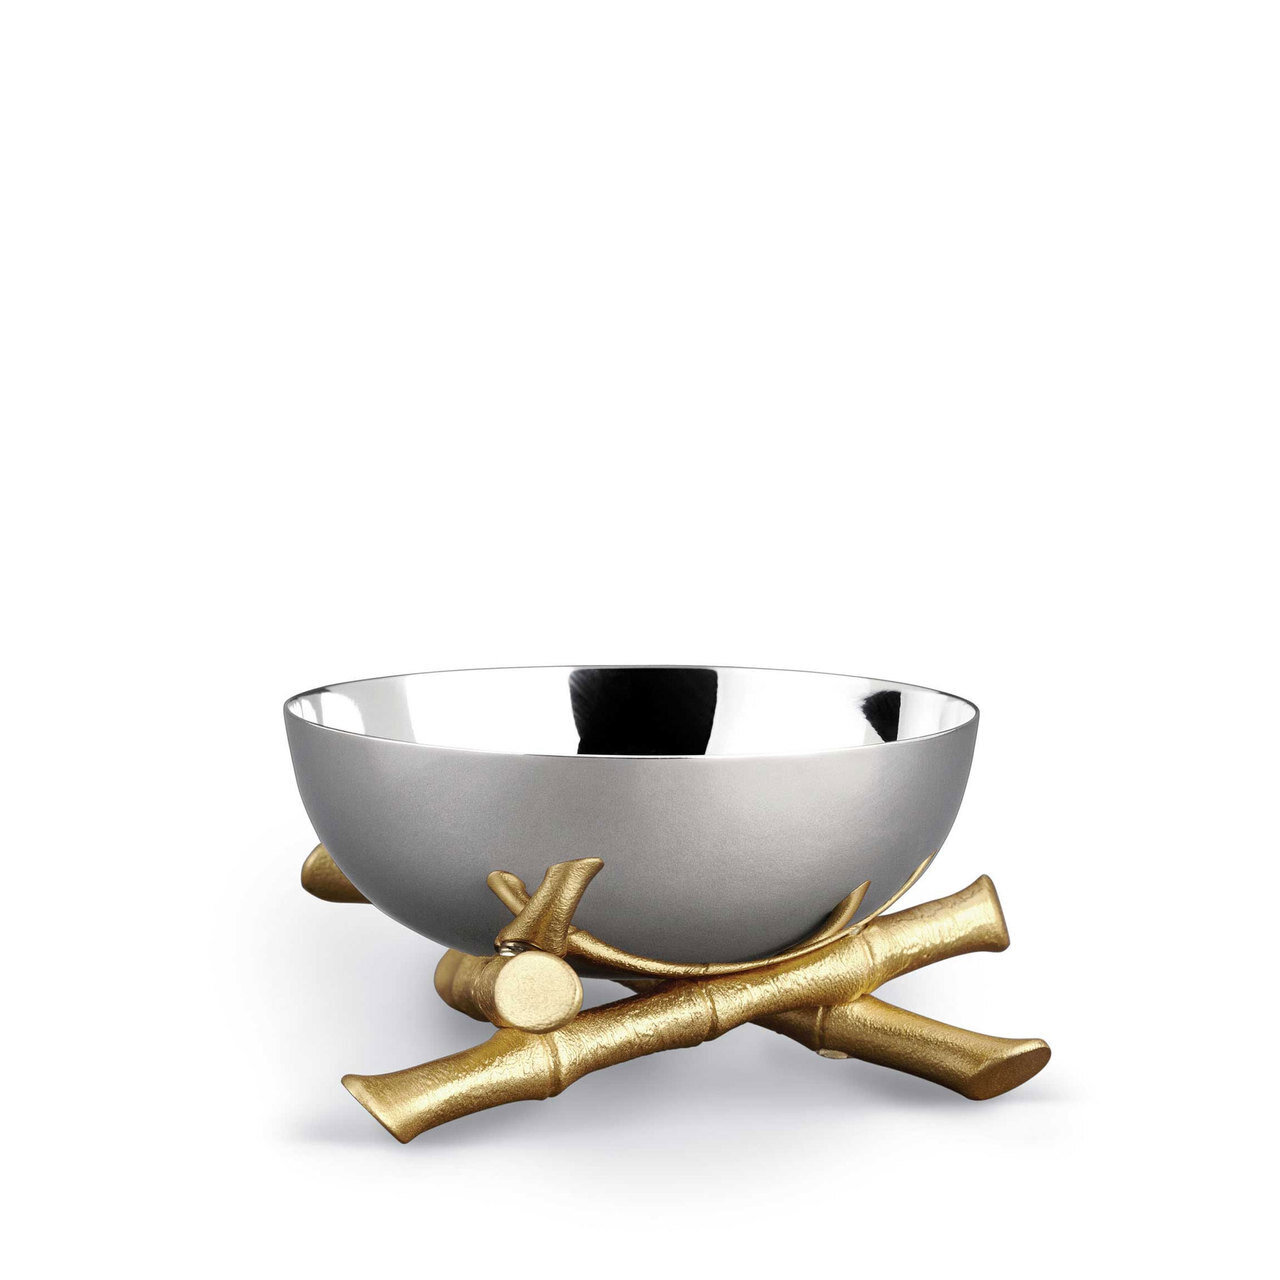 L'Objet Bambou Small Bowl 24k Gold-Plated Stainless Steel